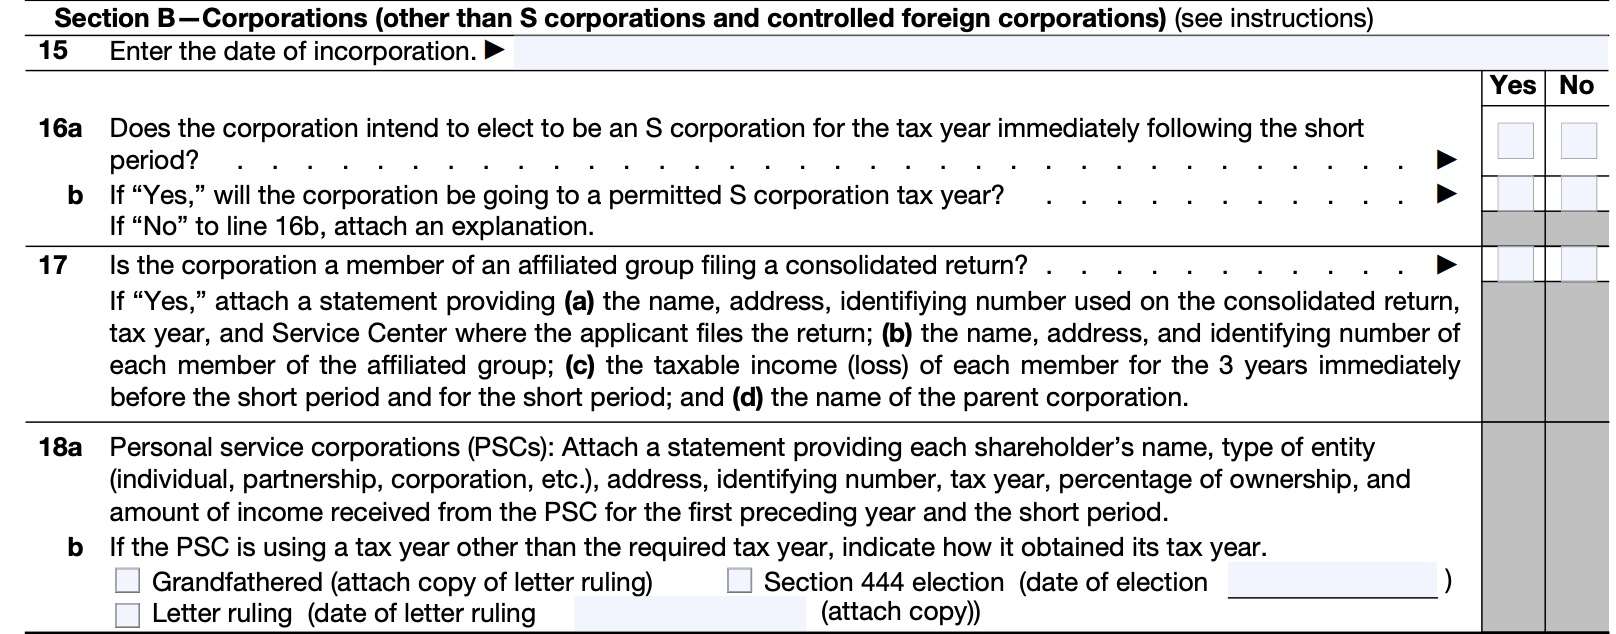 irs form 1128, part iii, section b, corporations